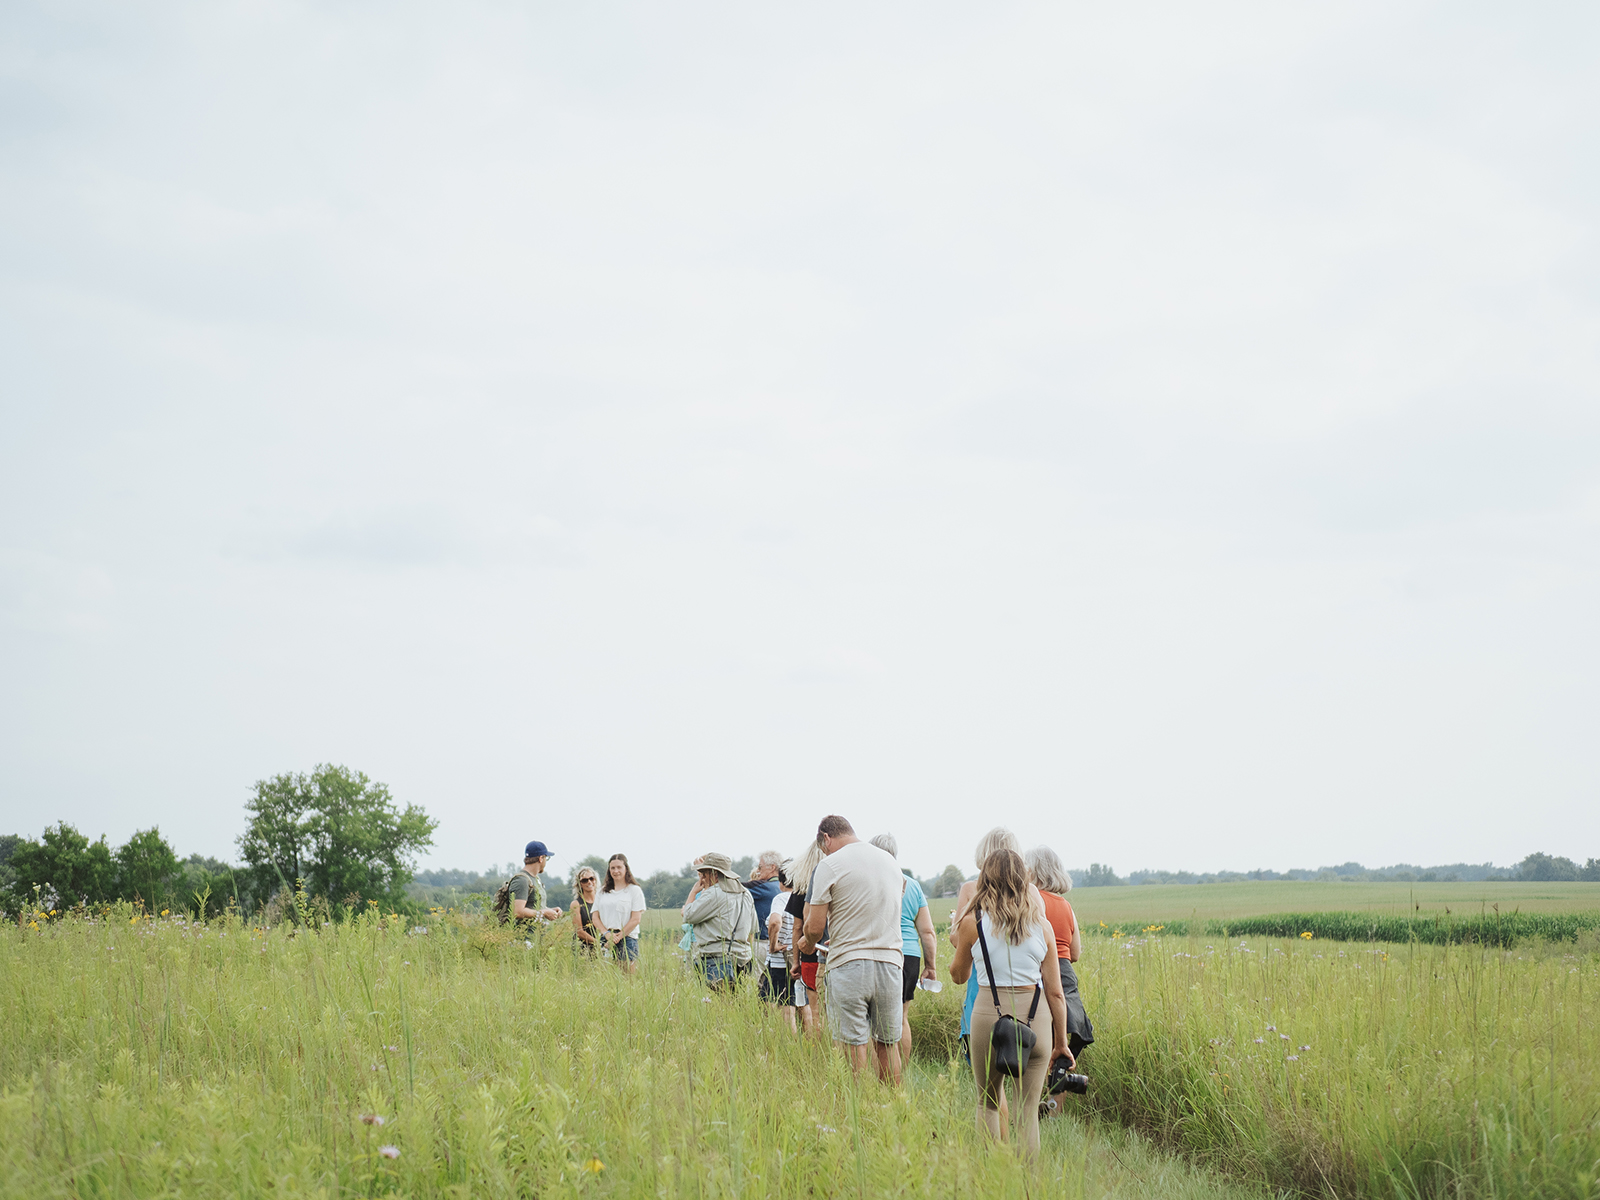 Expedition: Prairie Ecology Lab